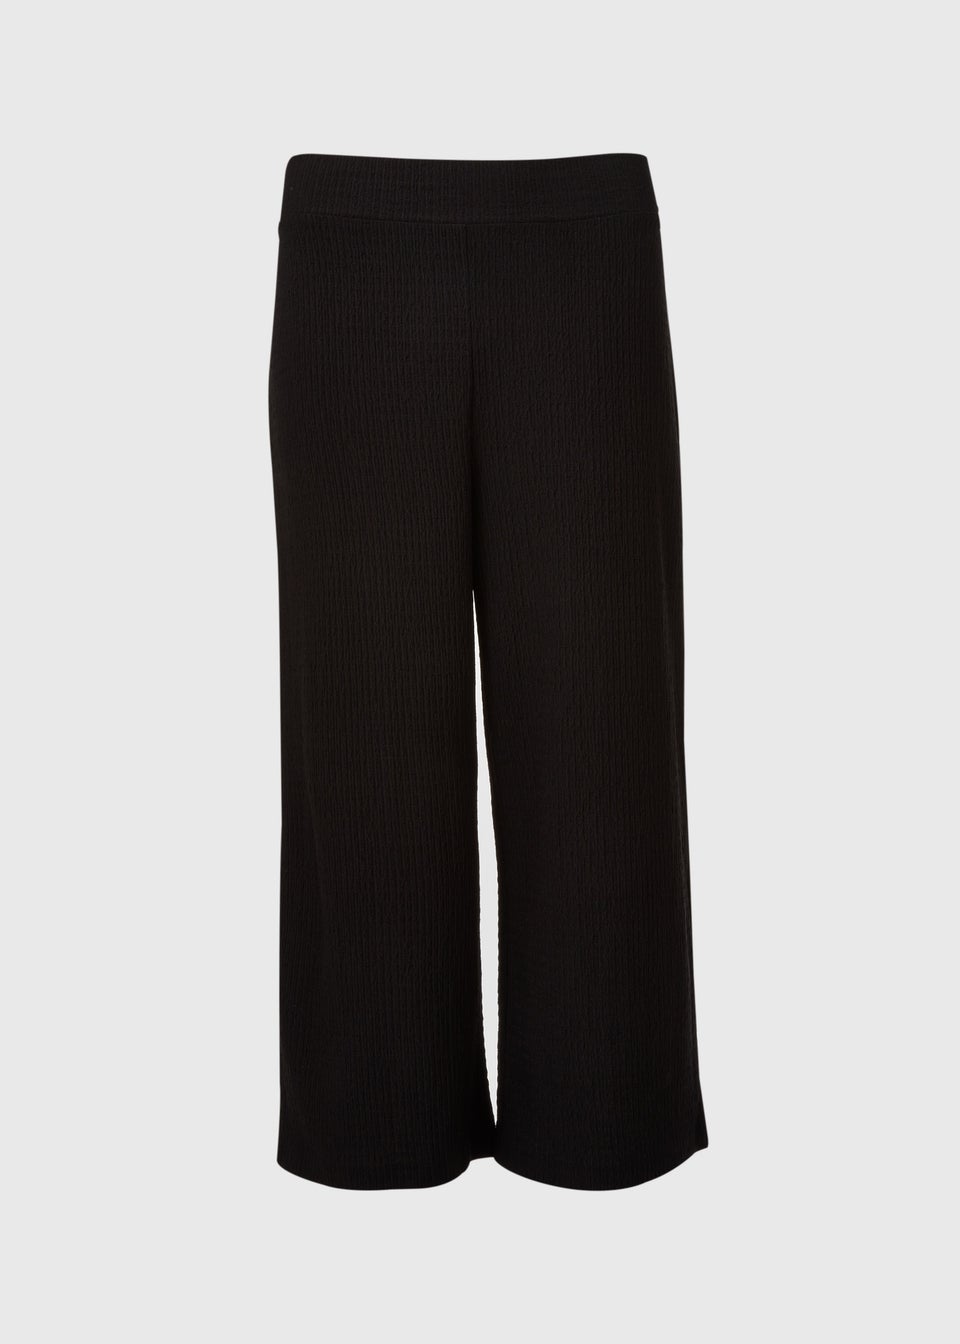 Black Textured Crop Trousers